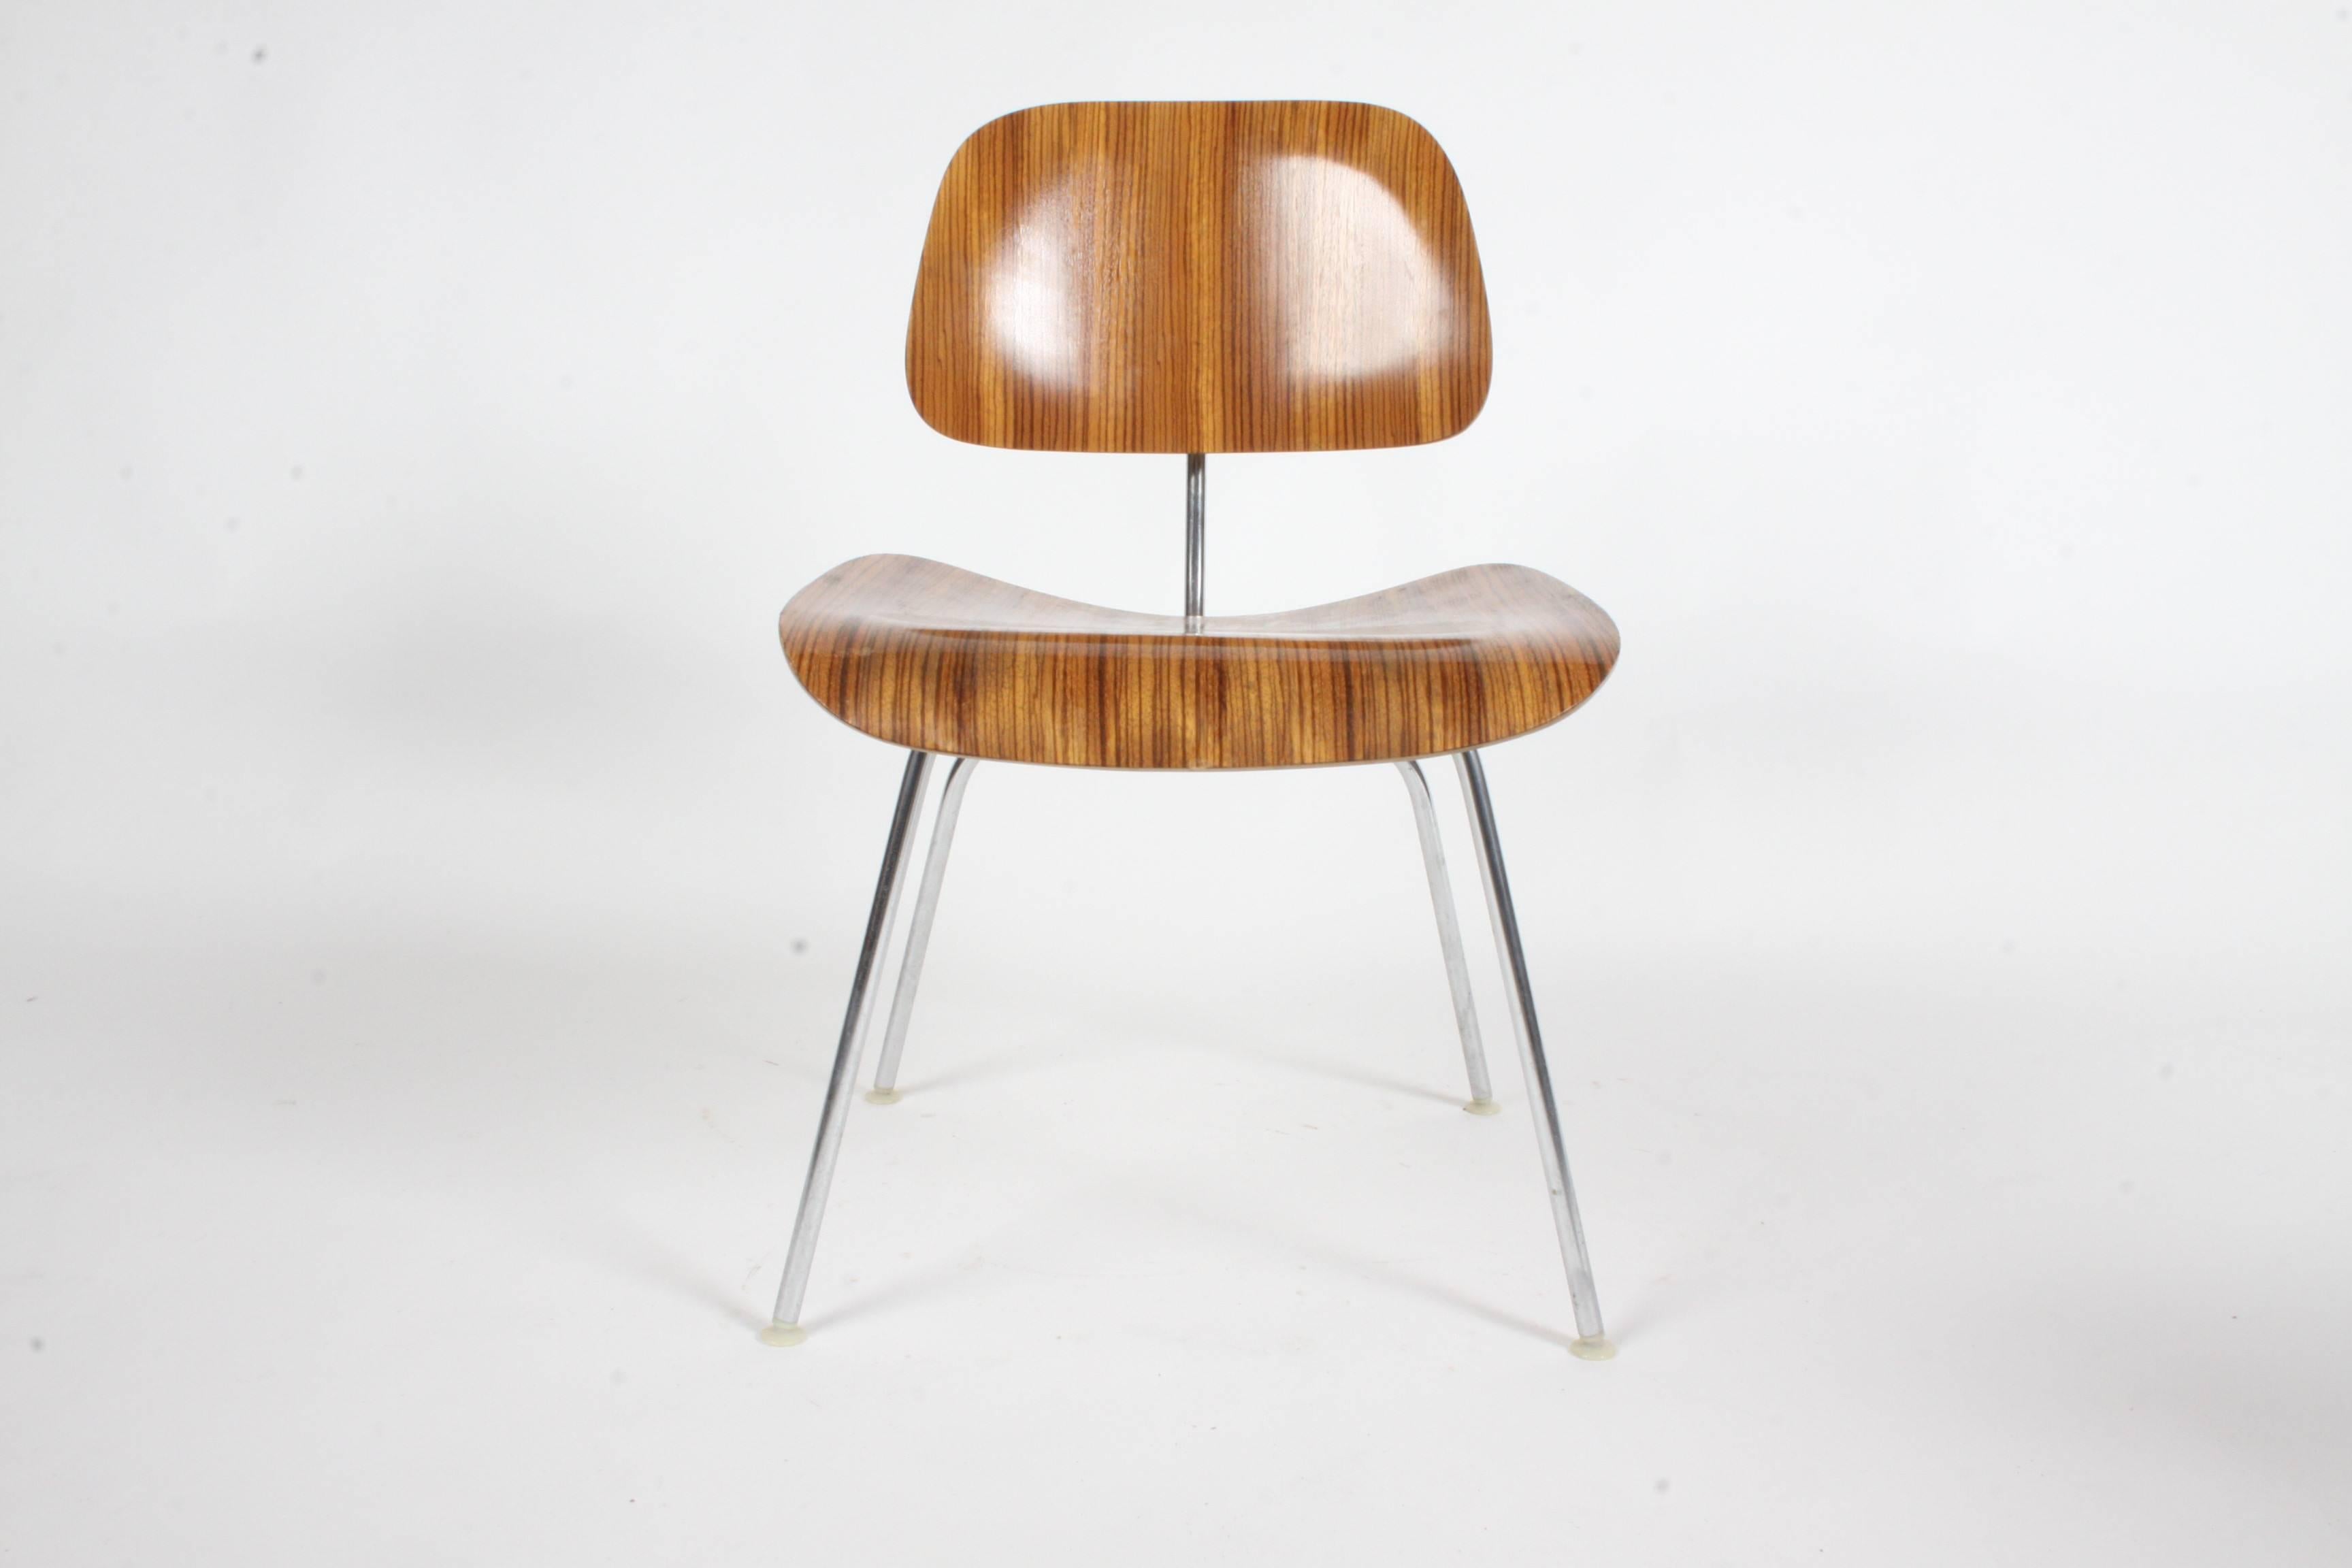  Charles Eames for Herman Miller Zebrawood DCM chairs, rare set. Zebrawood was used from 1954-1959. Very nice original condition, minor scuffs to seat. Labels.